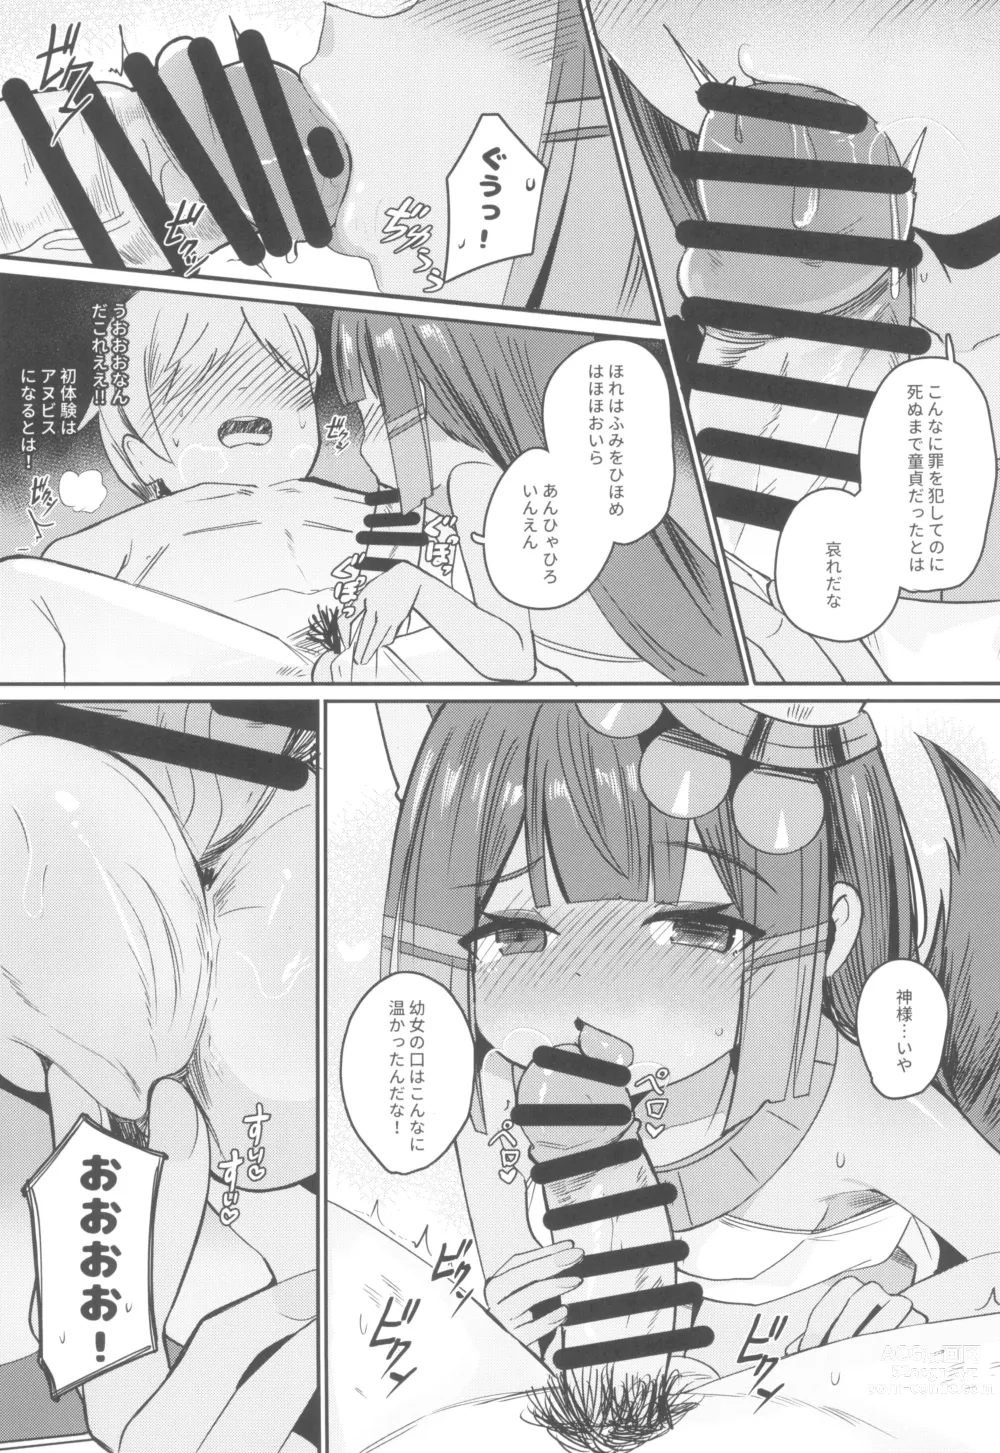 Page 13 of doujinshi Anubis no Ero Shisha Shinpan - She is the oldest FBI in human history and will find souls who have erotic thoughts about loli